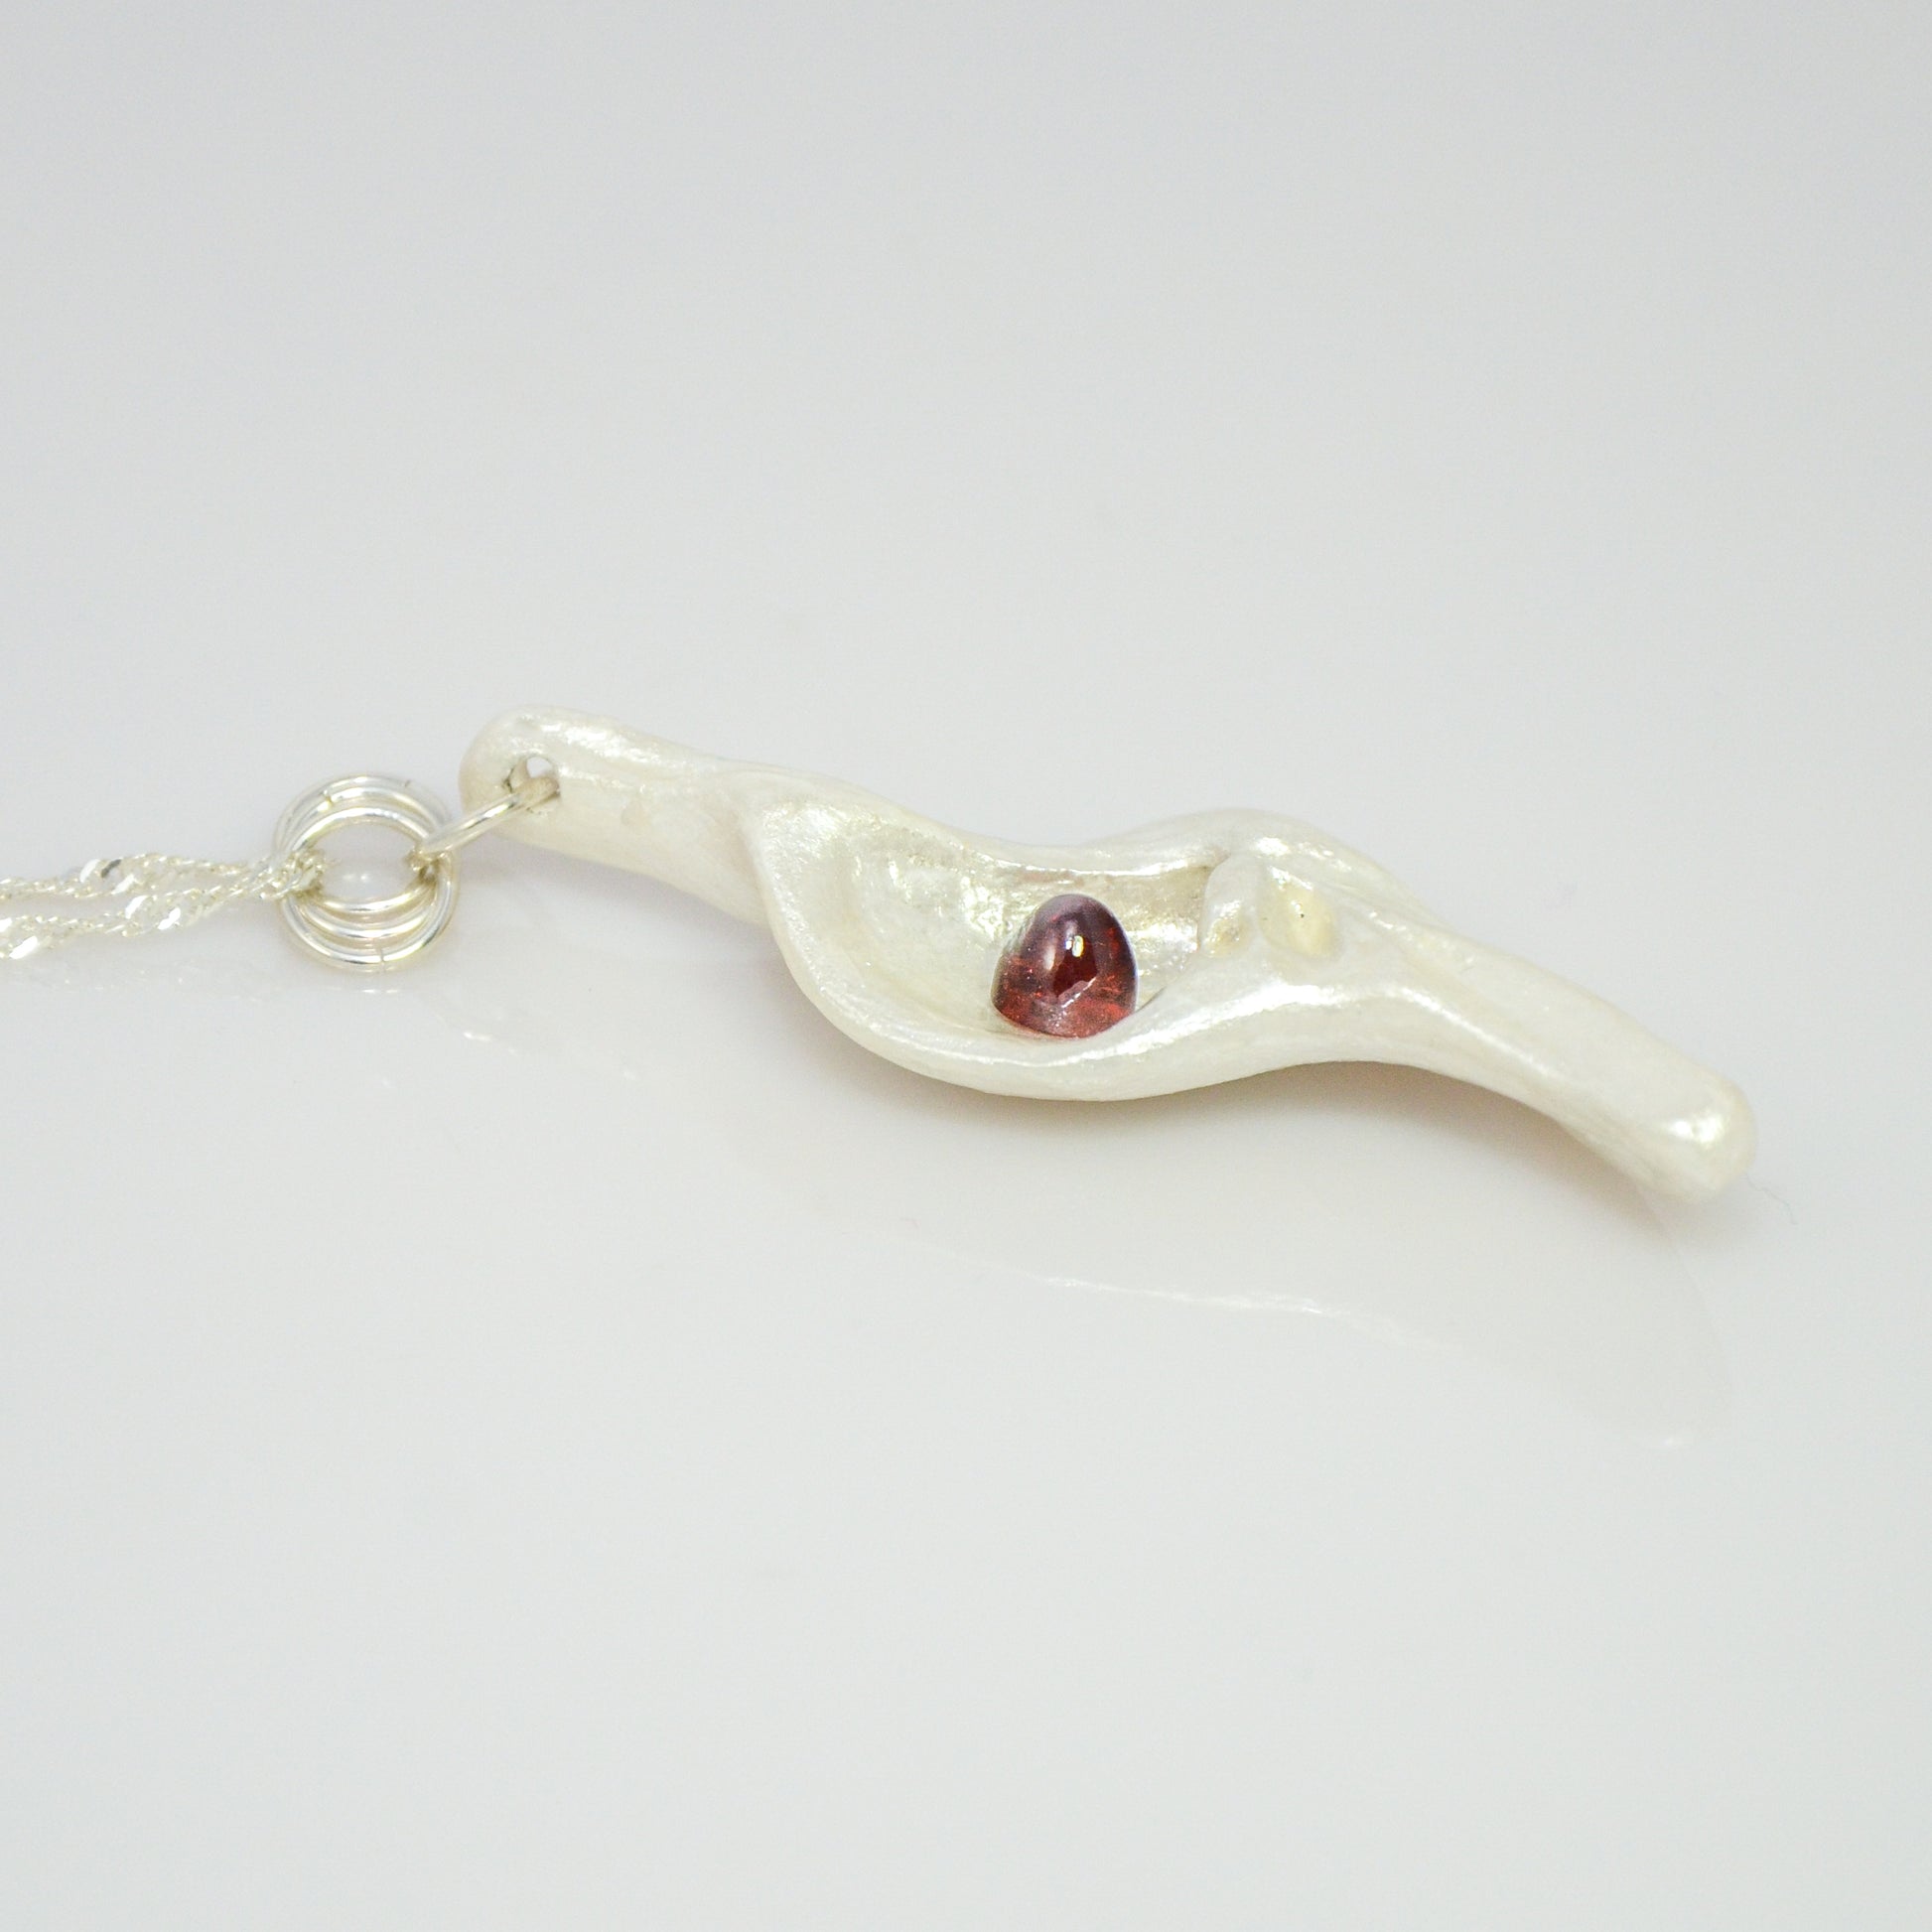 Pomegranate natural seashell pendant is adorned with a stunning Garnet gemstone.